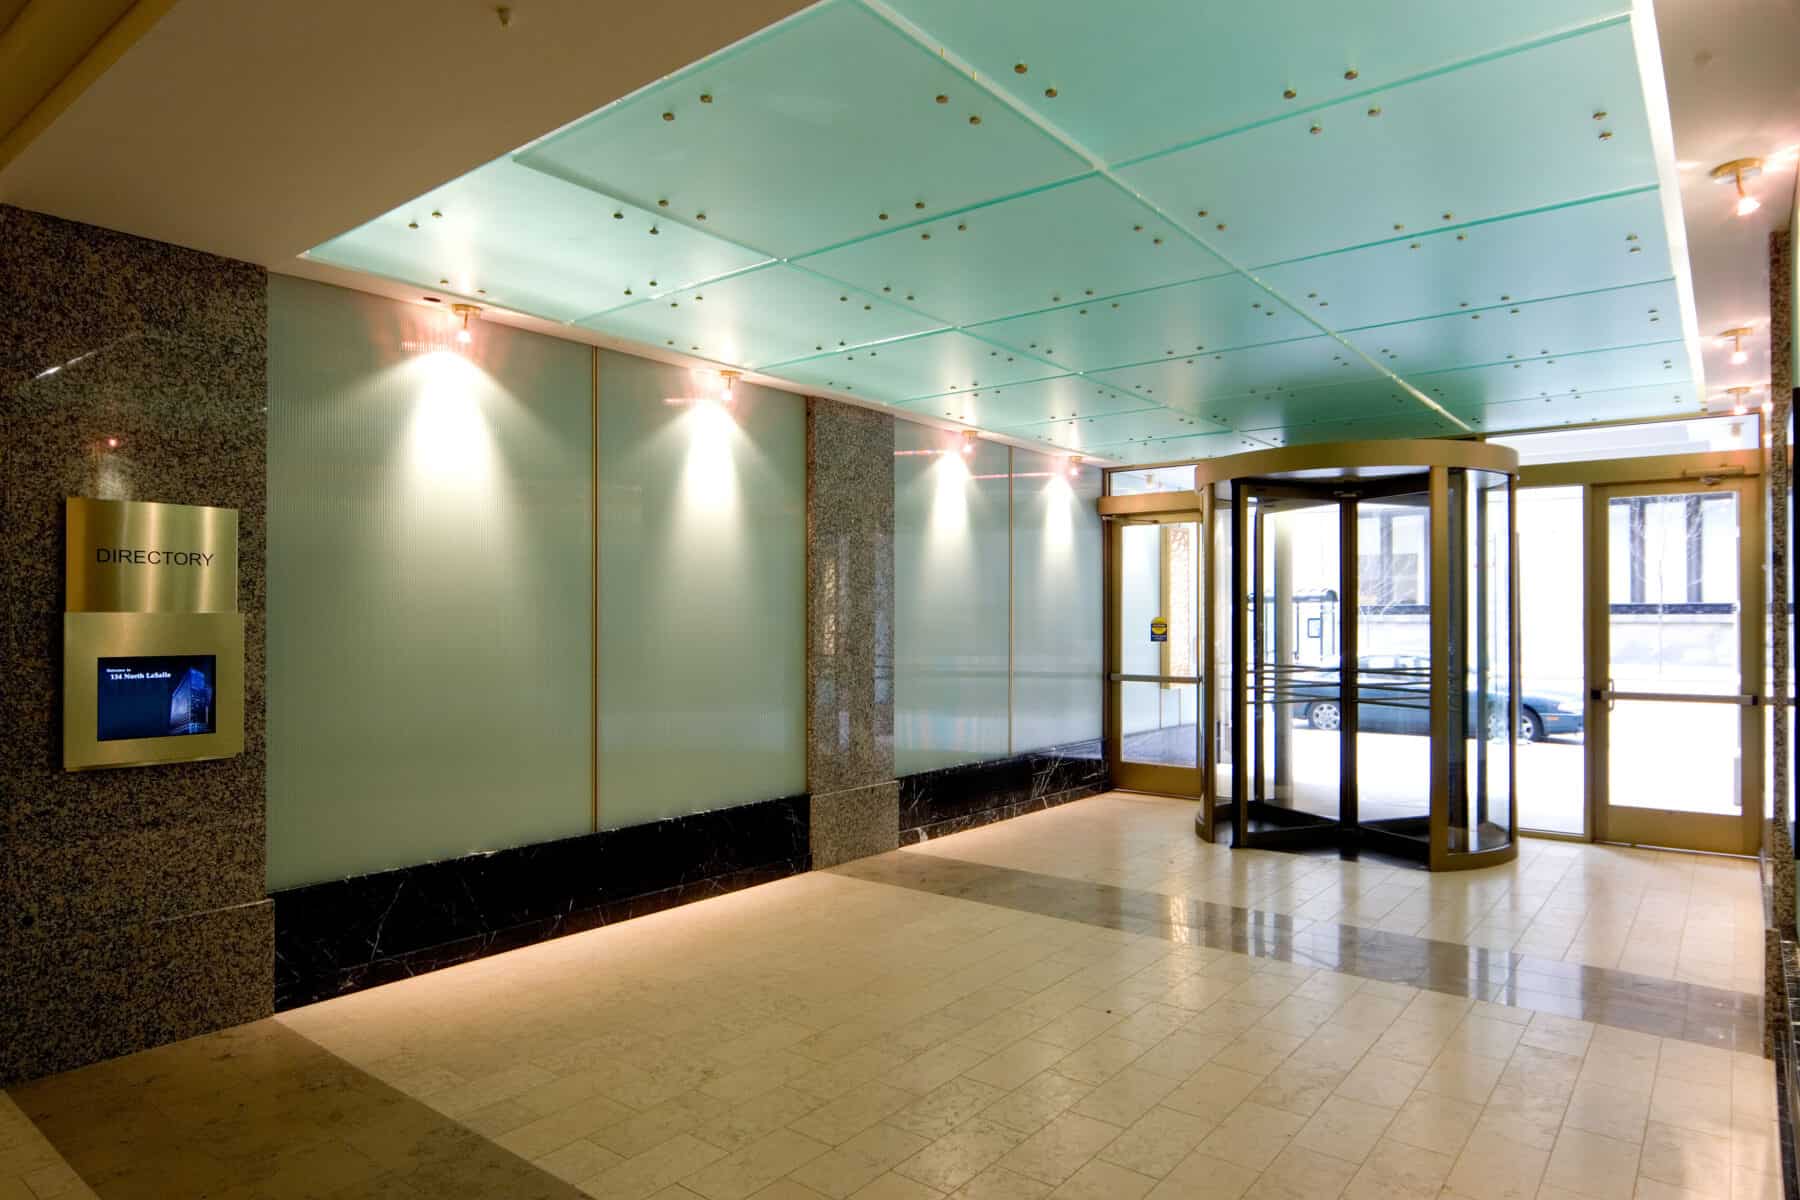 Custom Fabrication of Architectural Glass Wall Panels, Ceiling and Storefront from Construction Specialty Projects by Commercial Builder & General Contractor Structural Enterprises